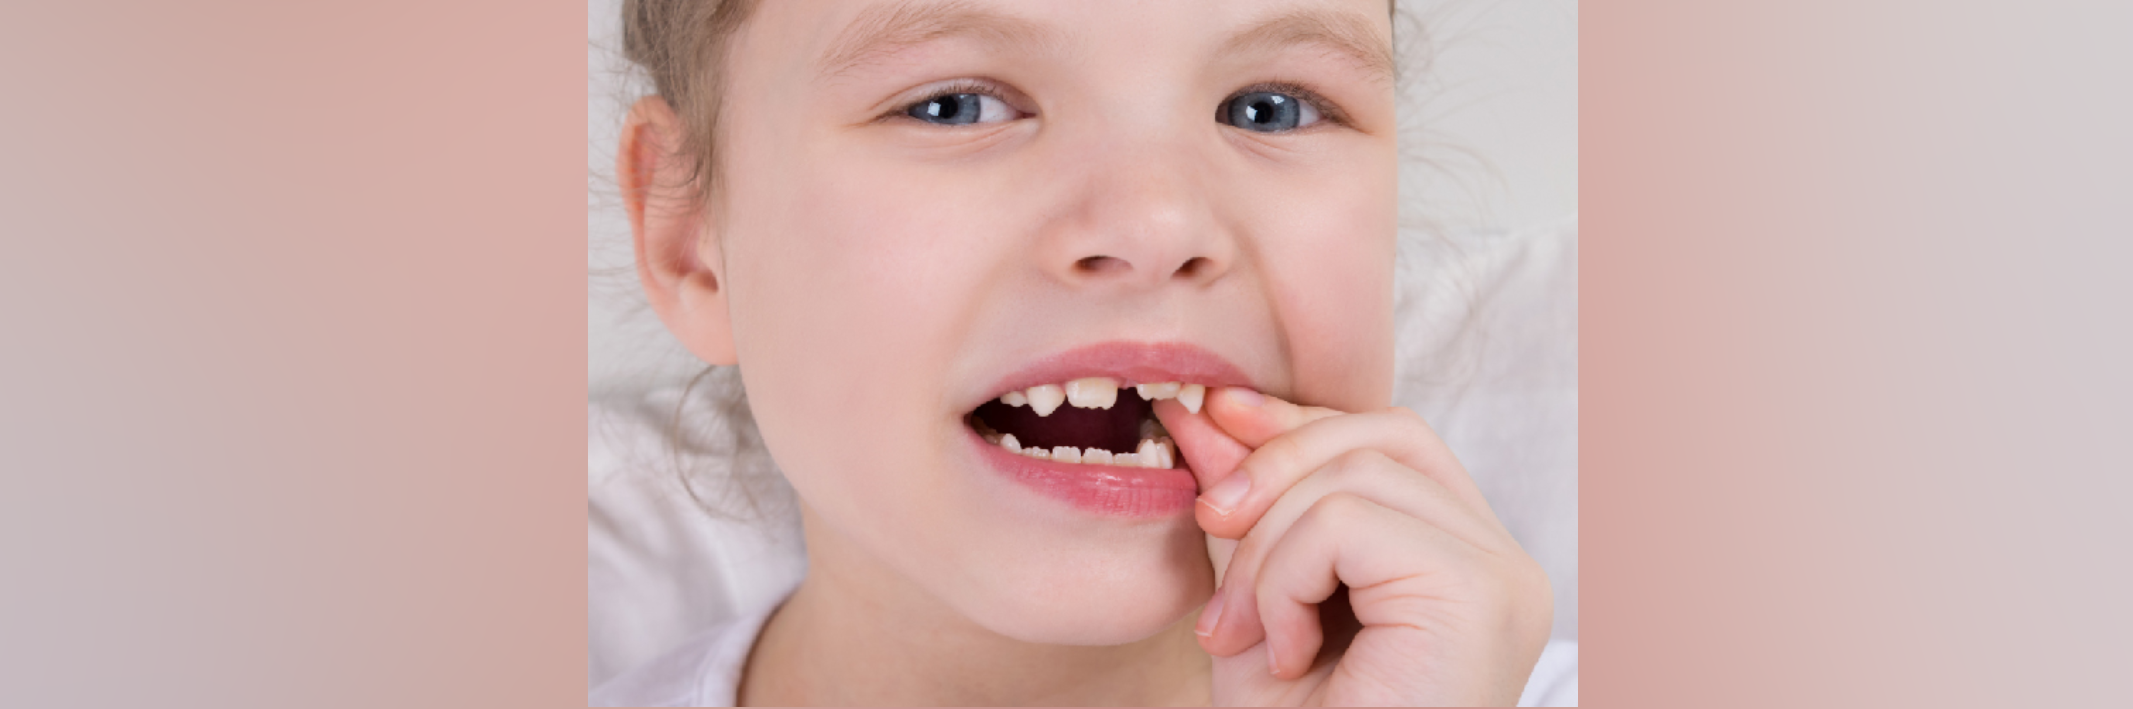 What To Expect After A Baby Tooth Extraction